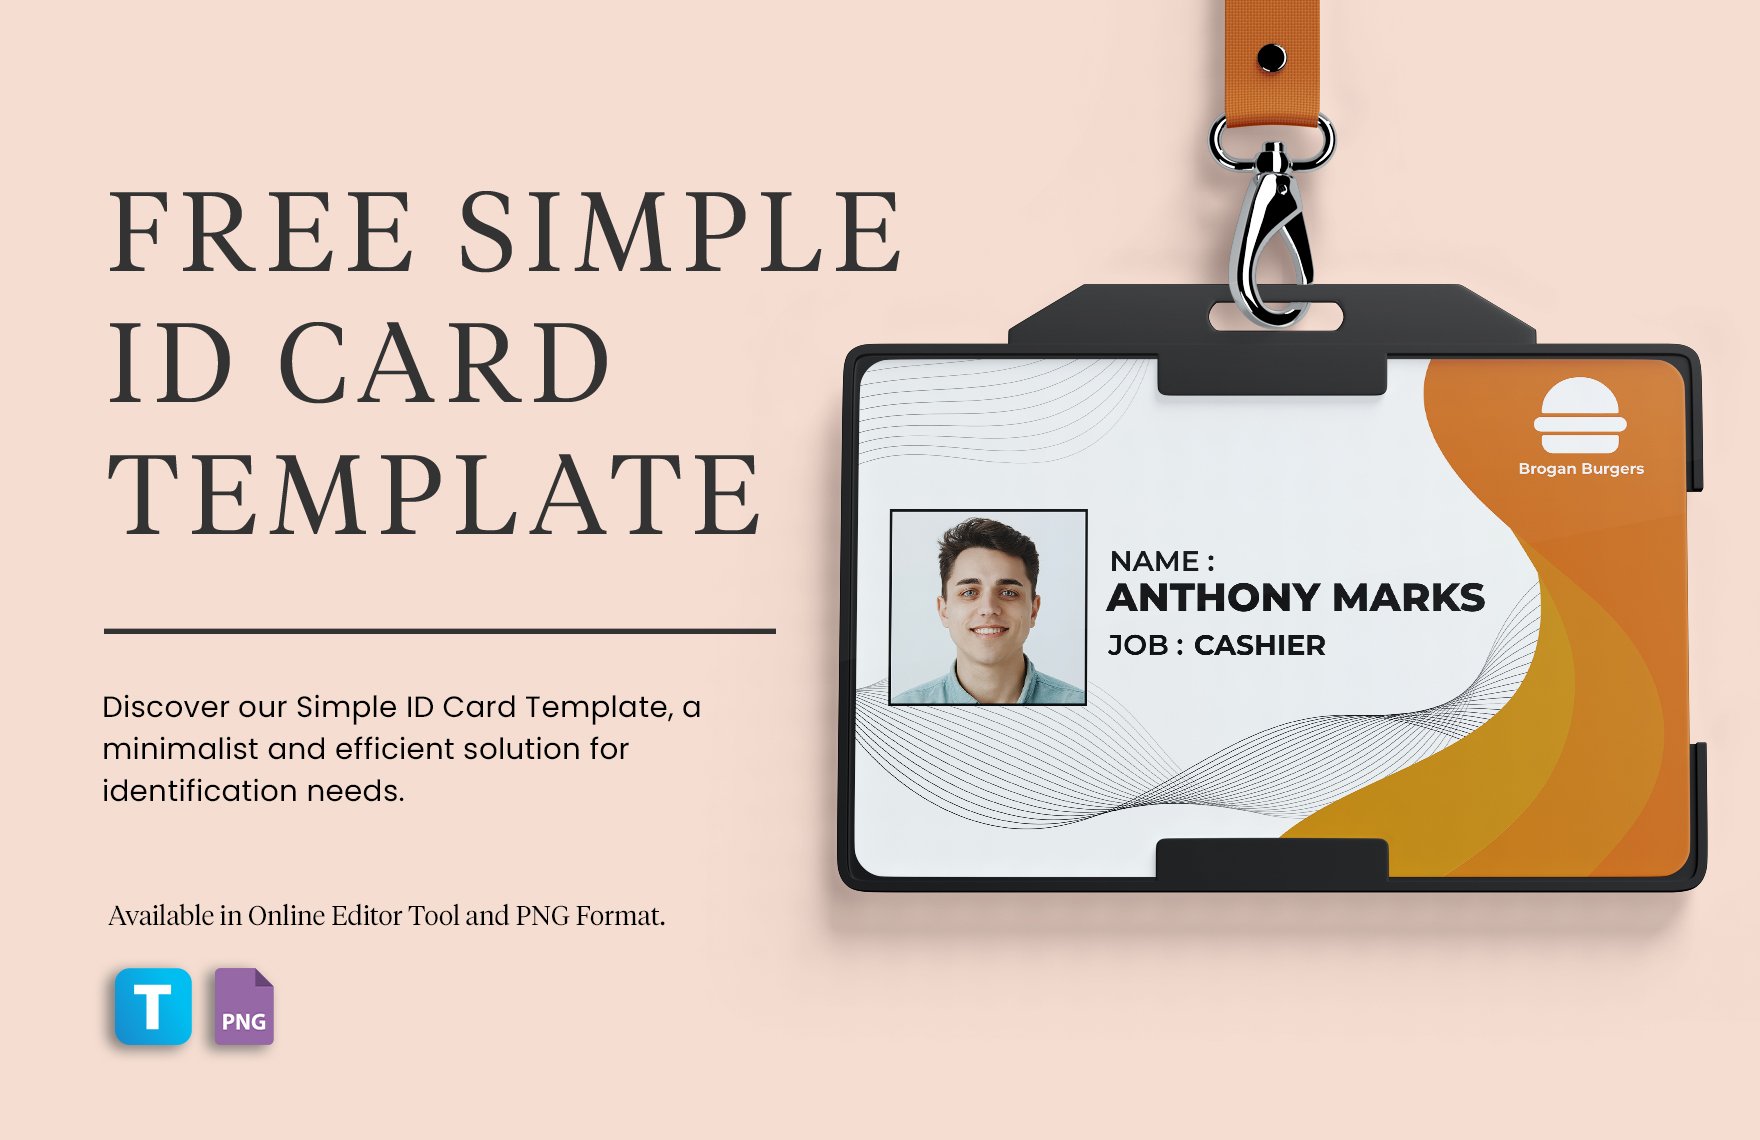 Free Simple ID Card Template